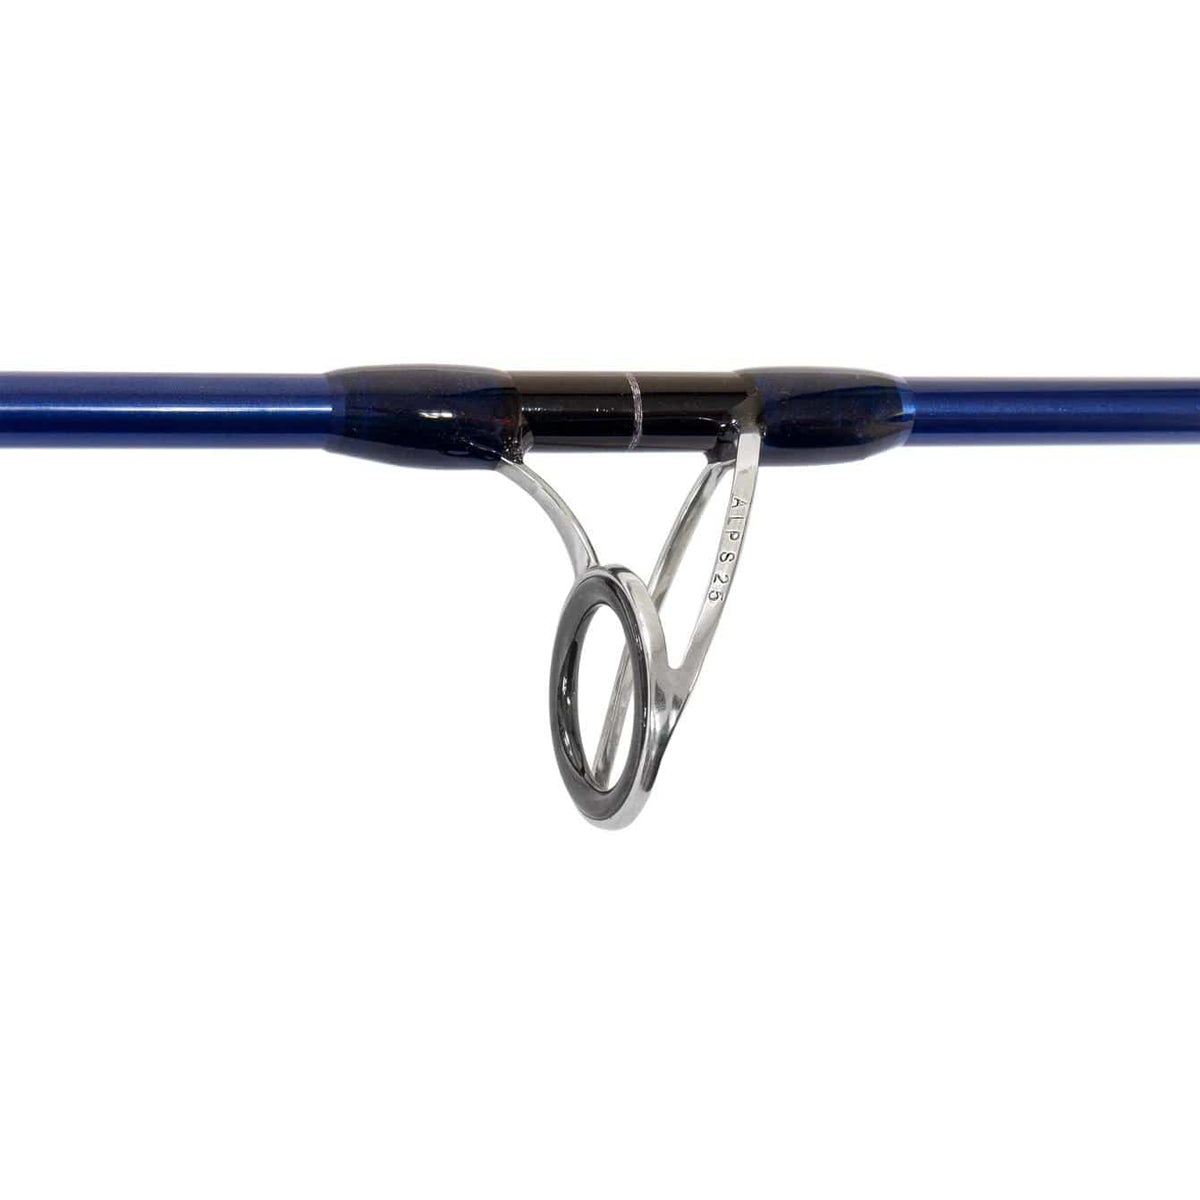 Tsunami Carbon Shield II Slow Pitch Conventional Rods